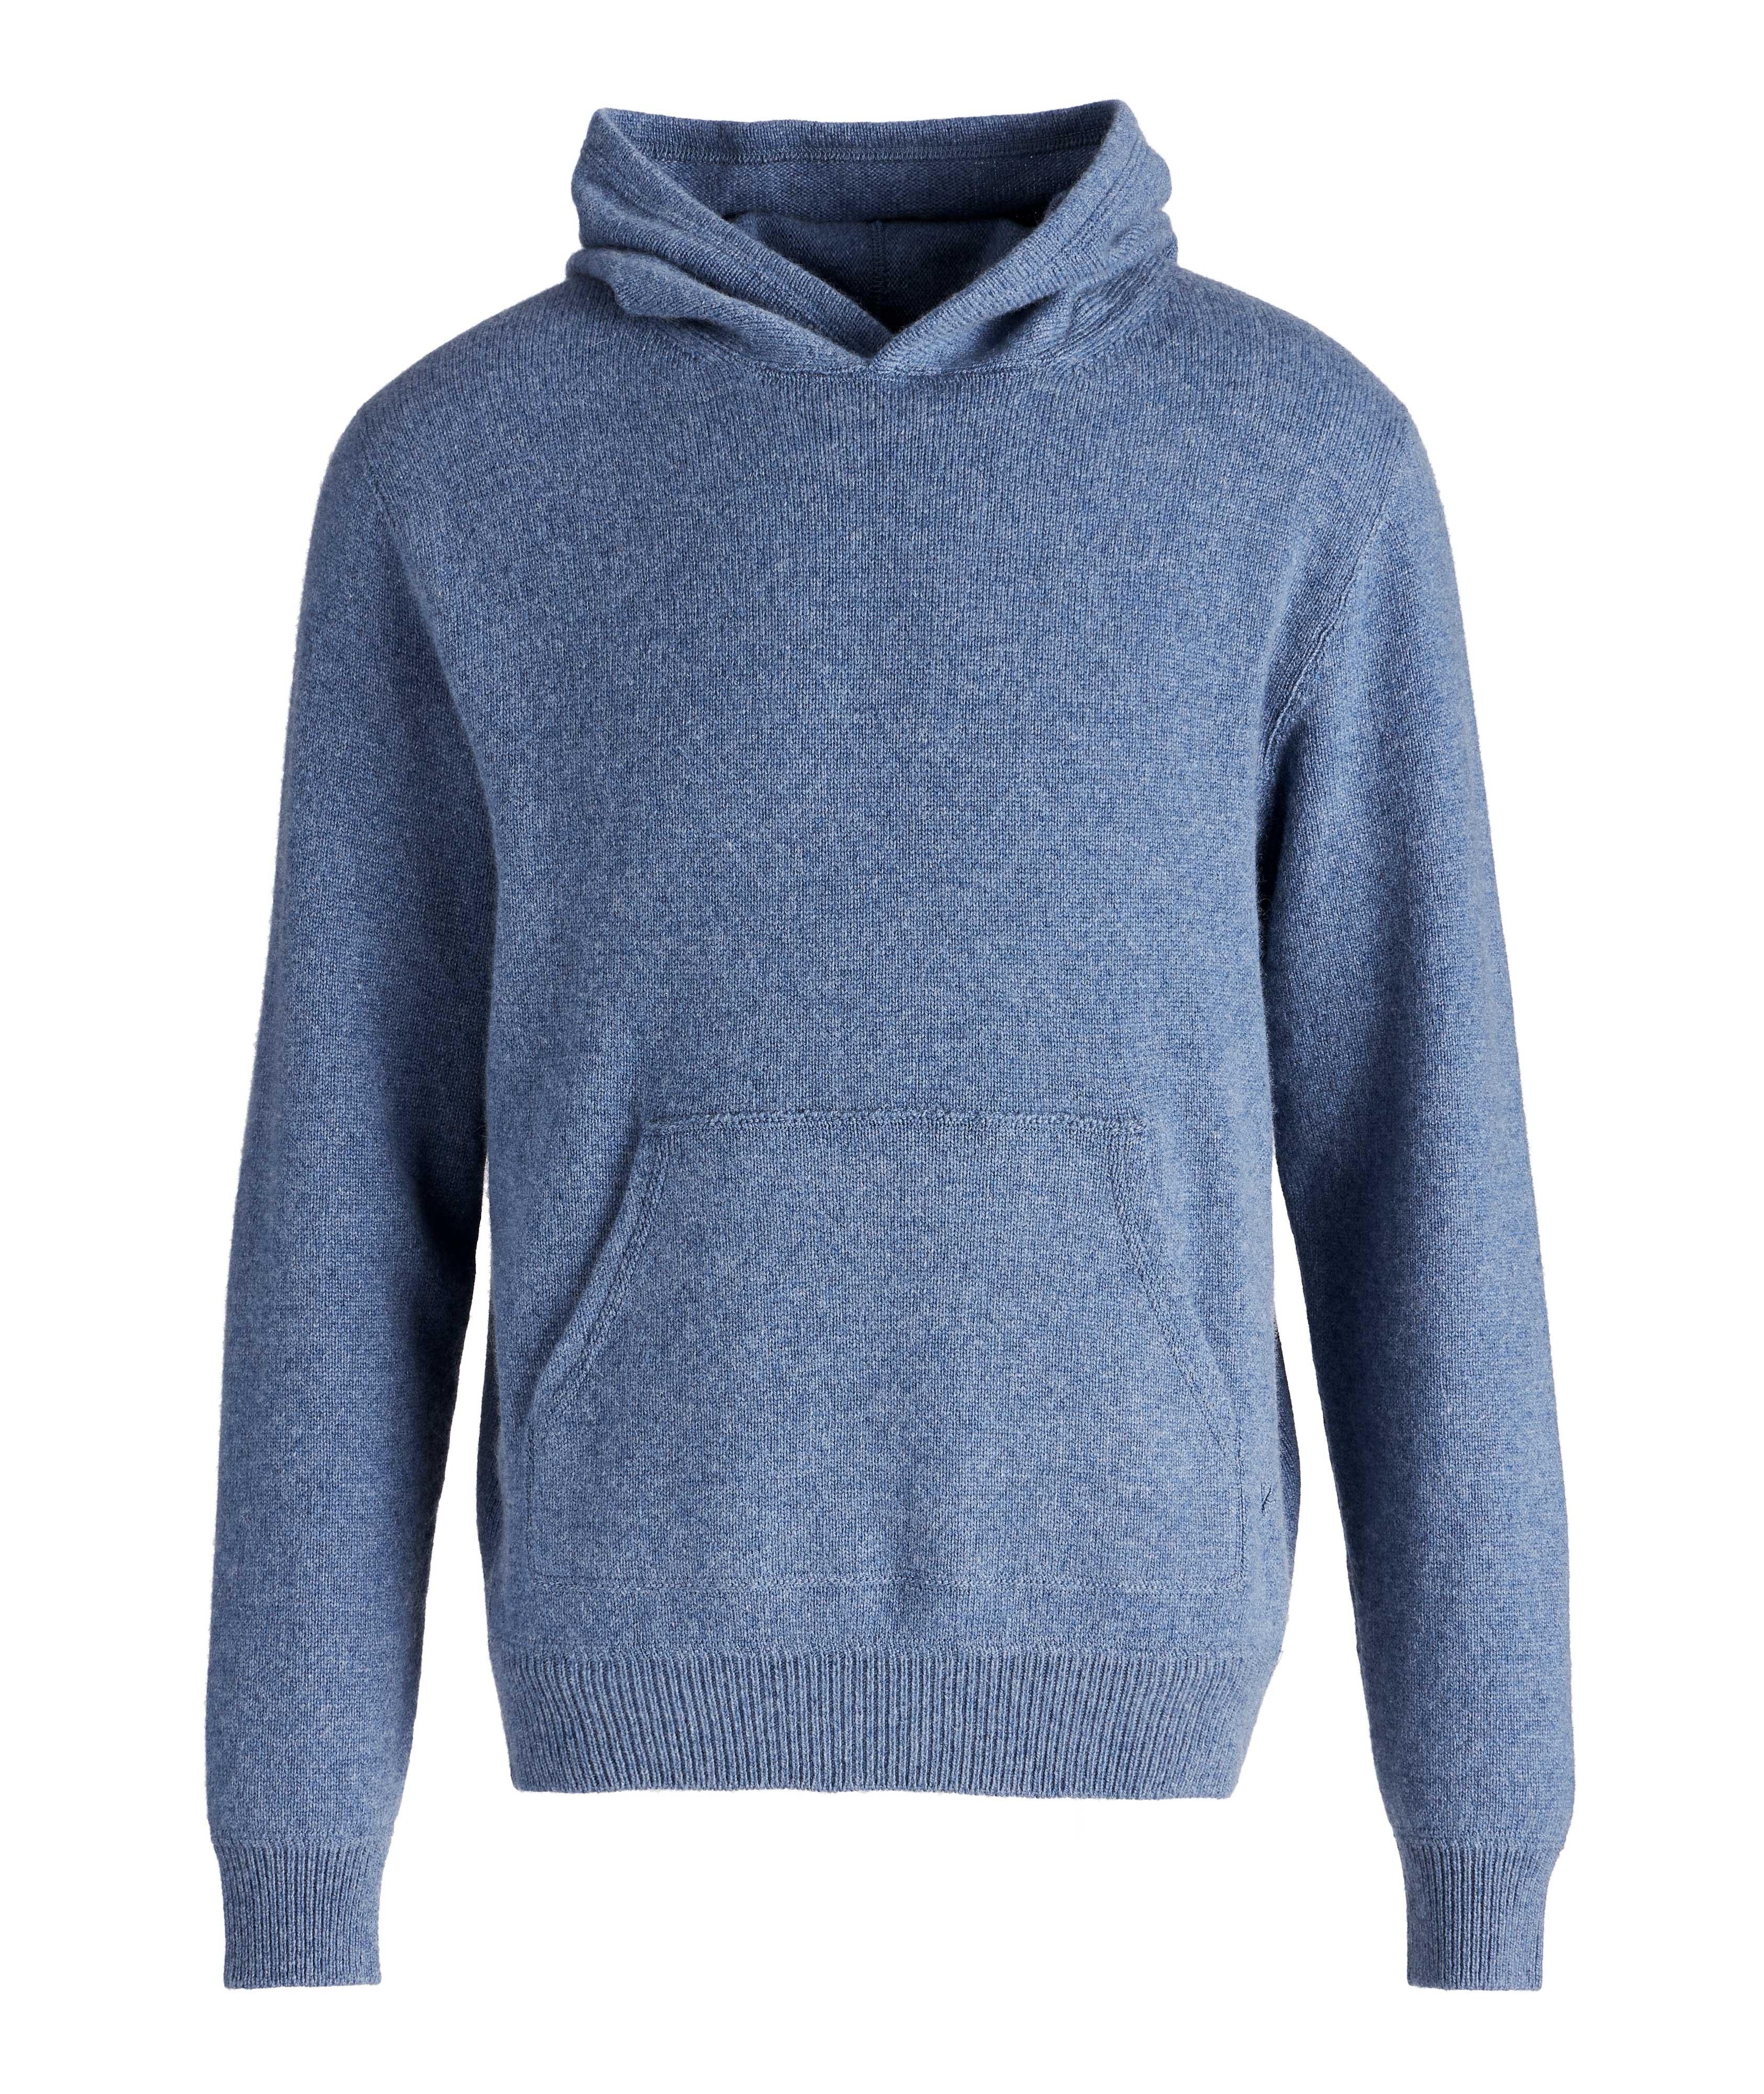 Cashmere Hoodie image 0